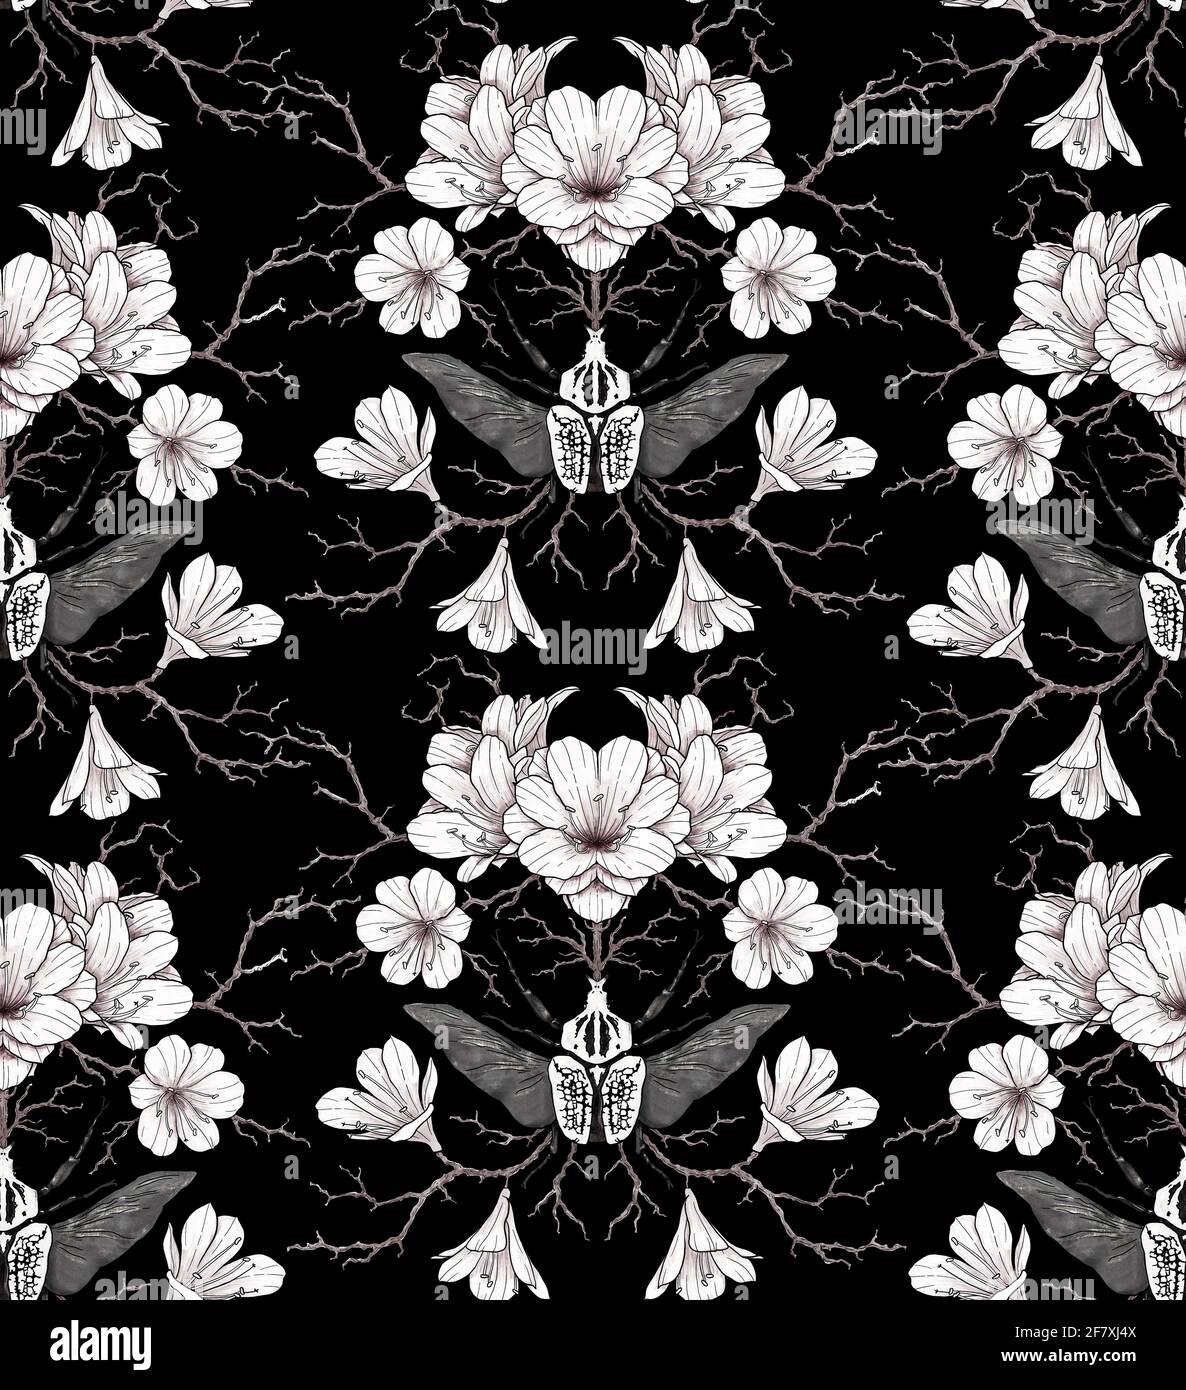 Mystical seamless pattern with beautiful flowers on black background. Hand drawing. Suitable for fabric, wrapping paper, wallpaper Stock Photo